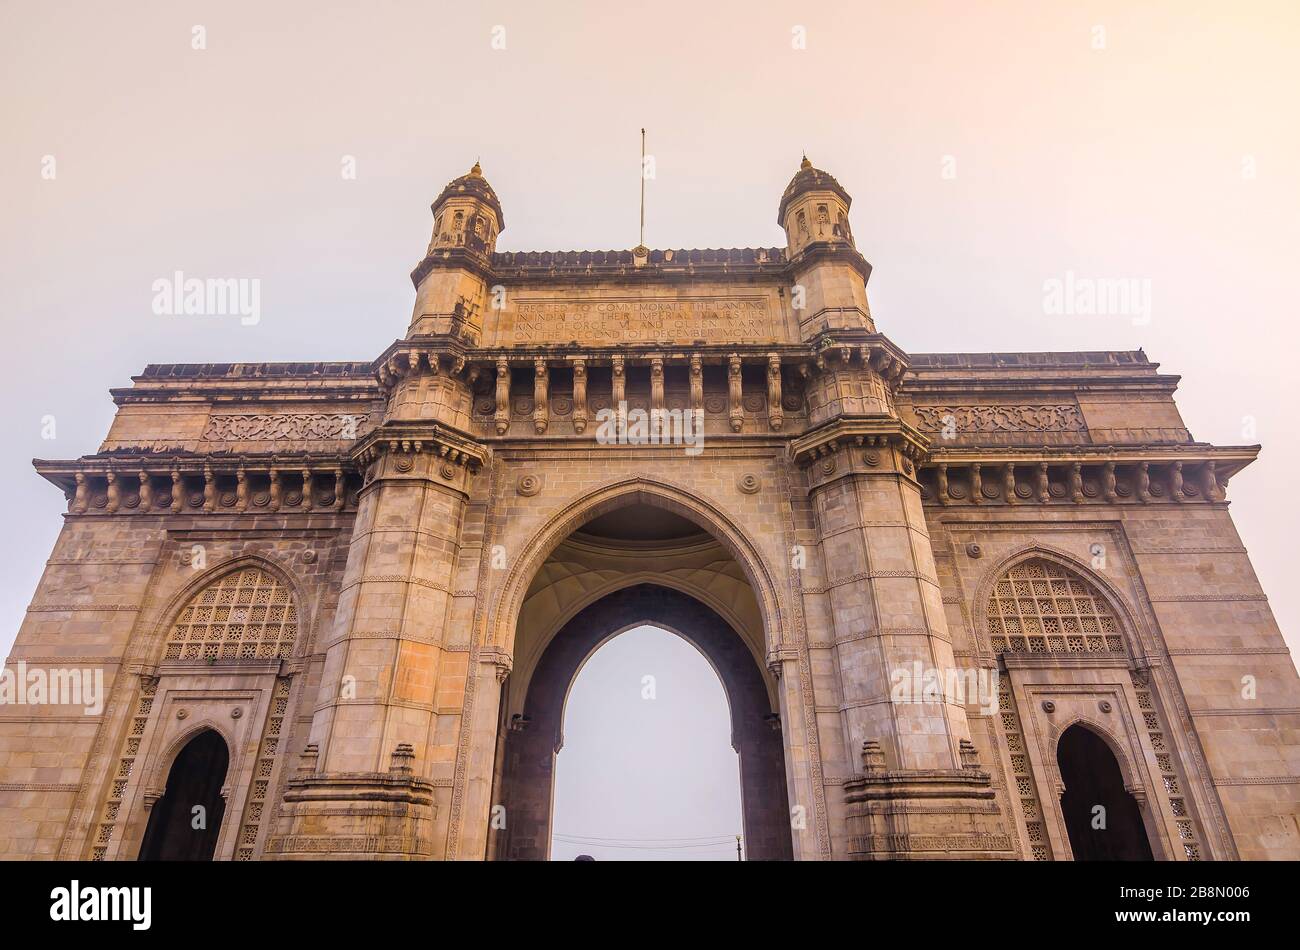 MUMBAI, INDIA – DEC. 8, 2019: Gateway of India in Maharashtra, opposite to the Taj Mahal Palace and Tower Hotel, it is also prime tourist attraction. Stock Photo